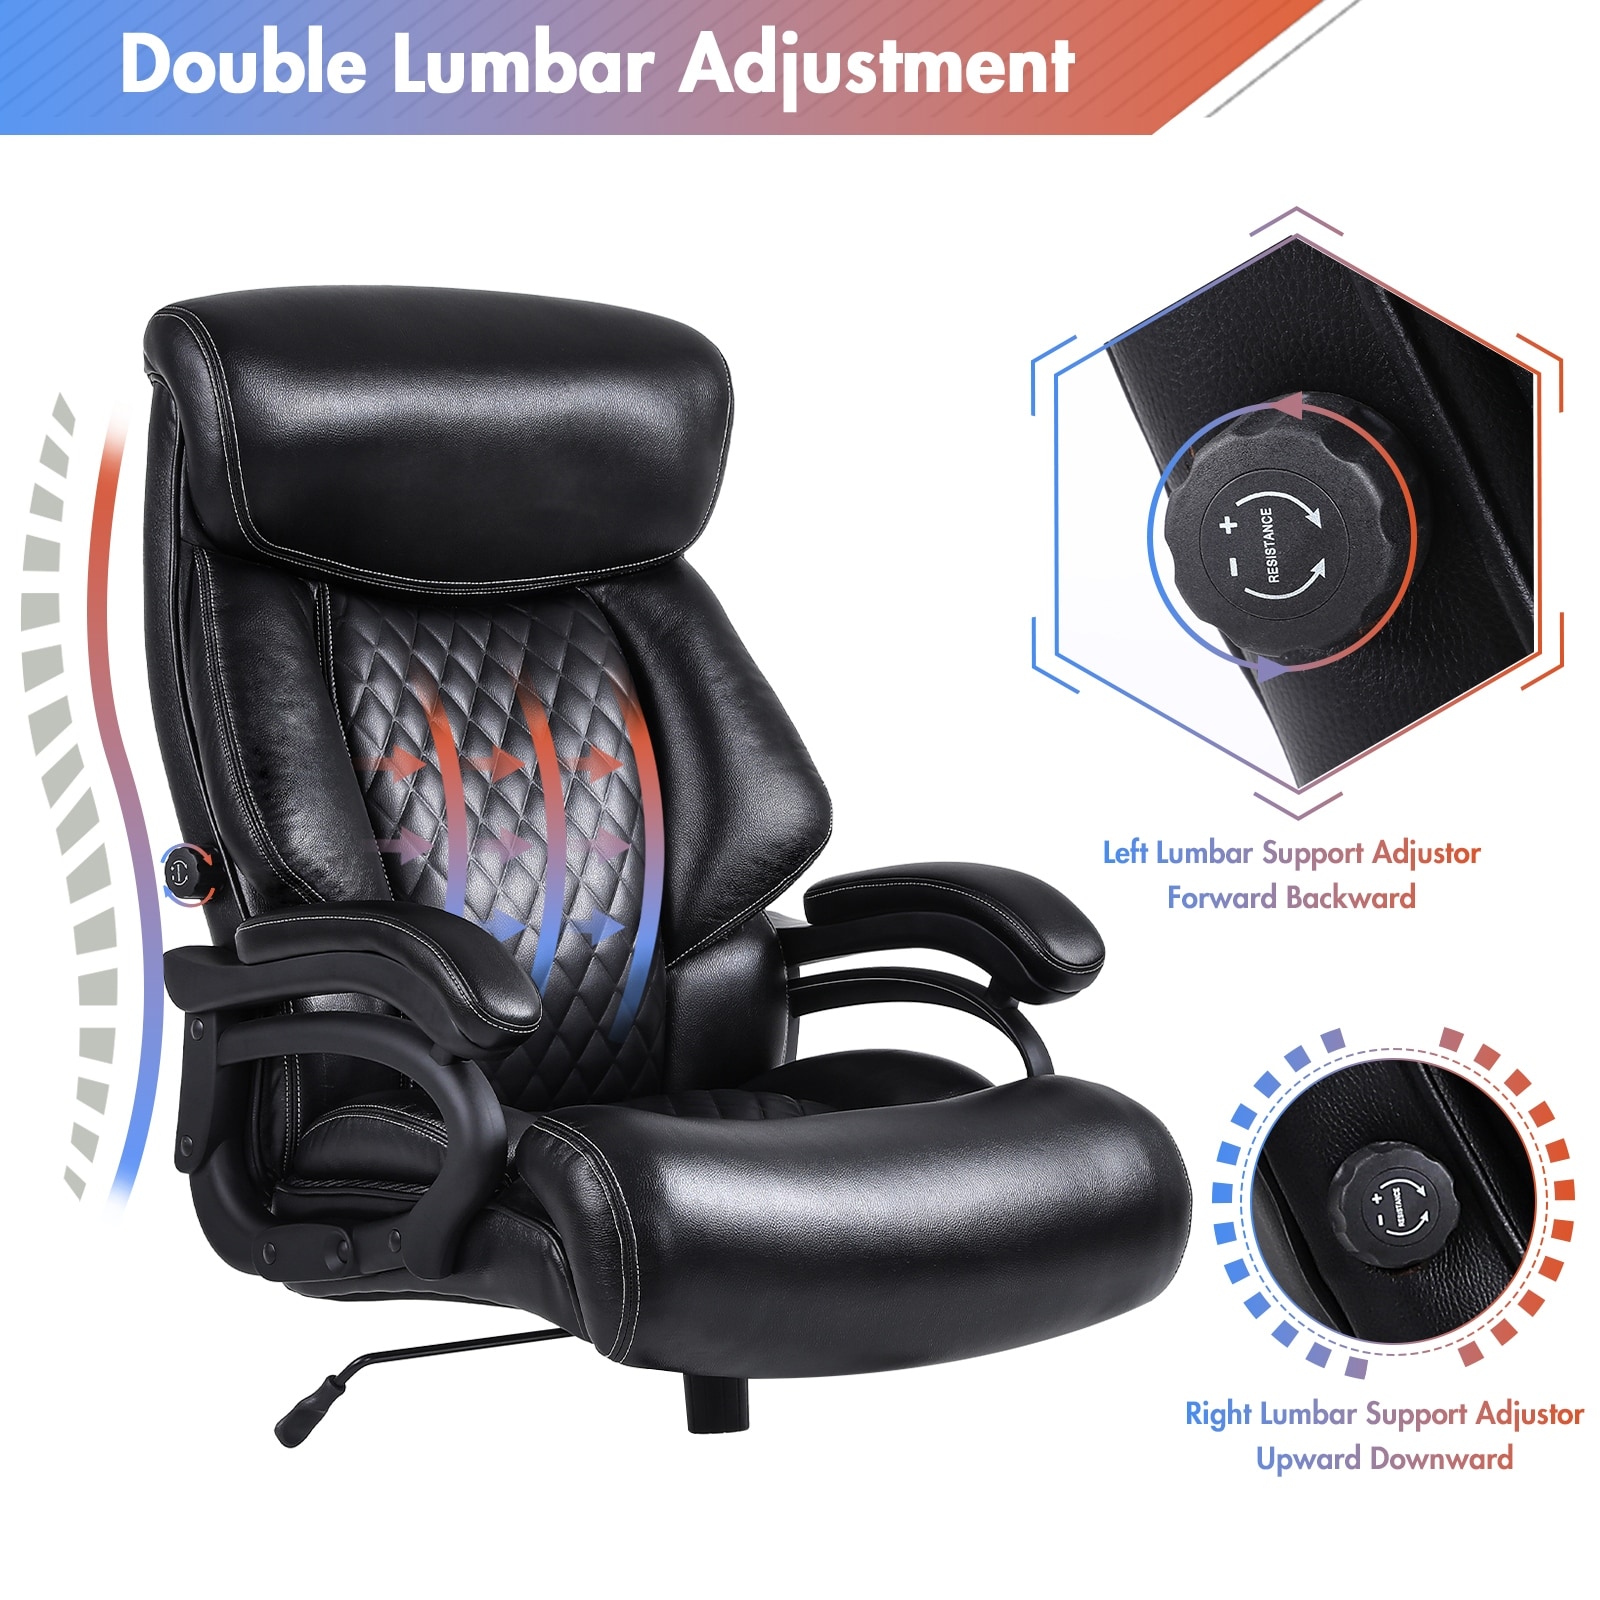 https://ak1.ostkcdn.com/images/products/is/images/direct/30d0aed8da8f965f454f053d07583d7beac1ba37/Big-and-Tall-Office-Chair-500lbs-for-Heavy-People-with-Quiet-Rubber-Wheels.jpg